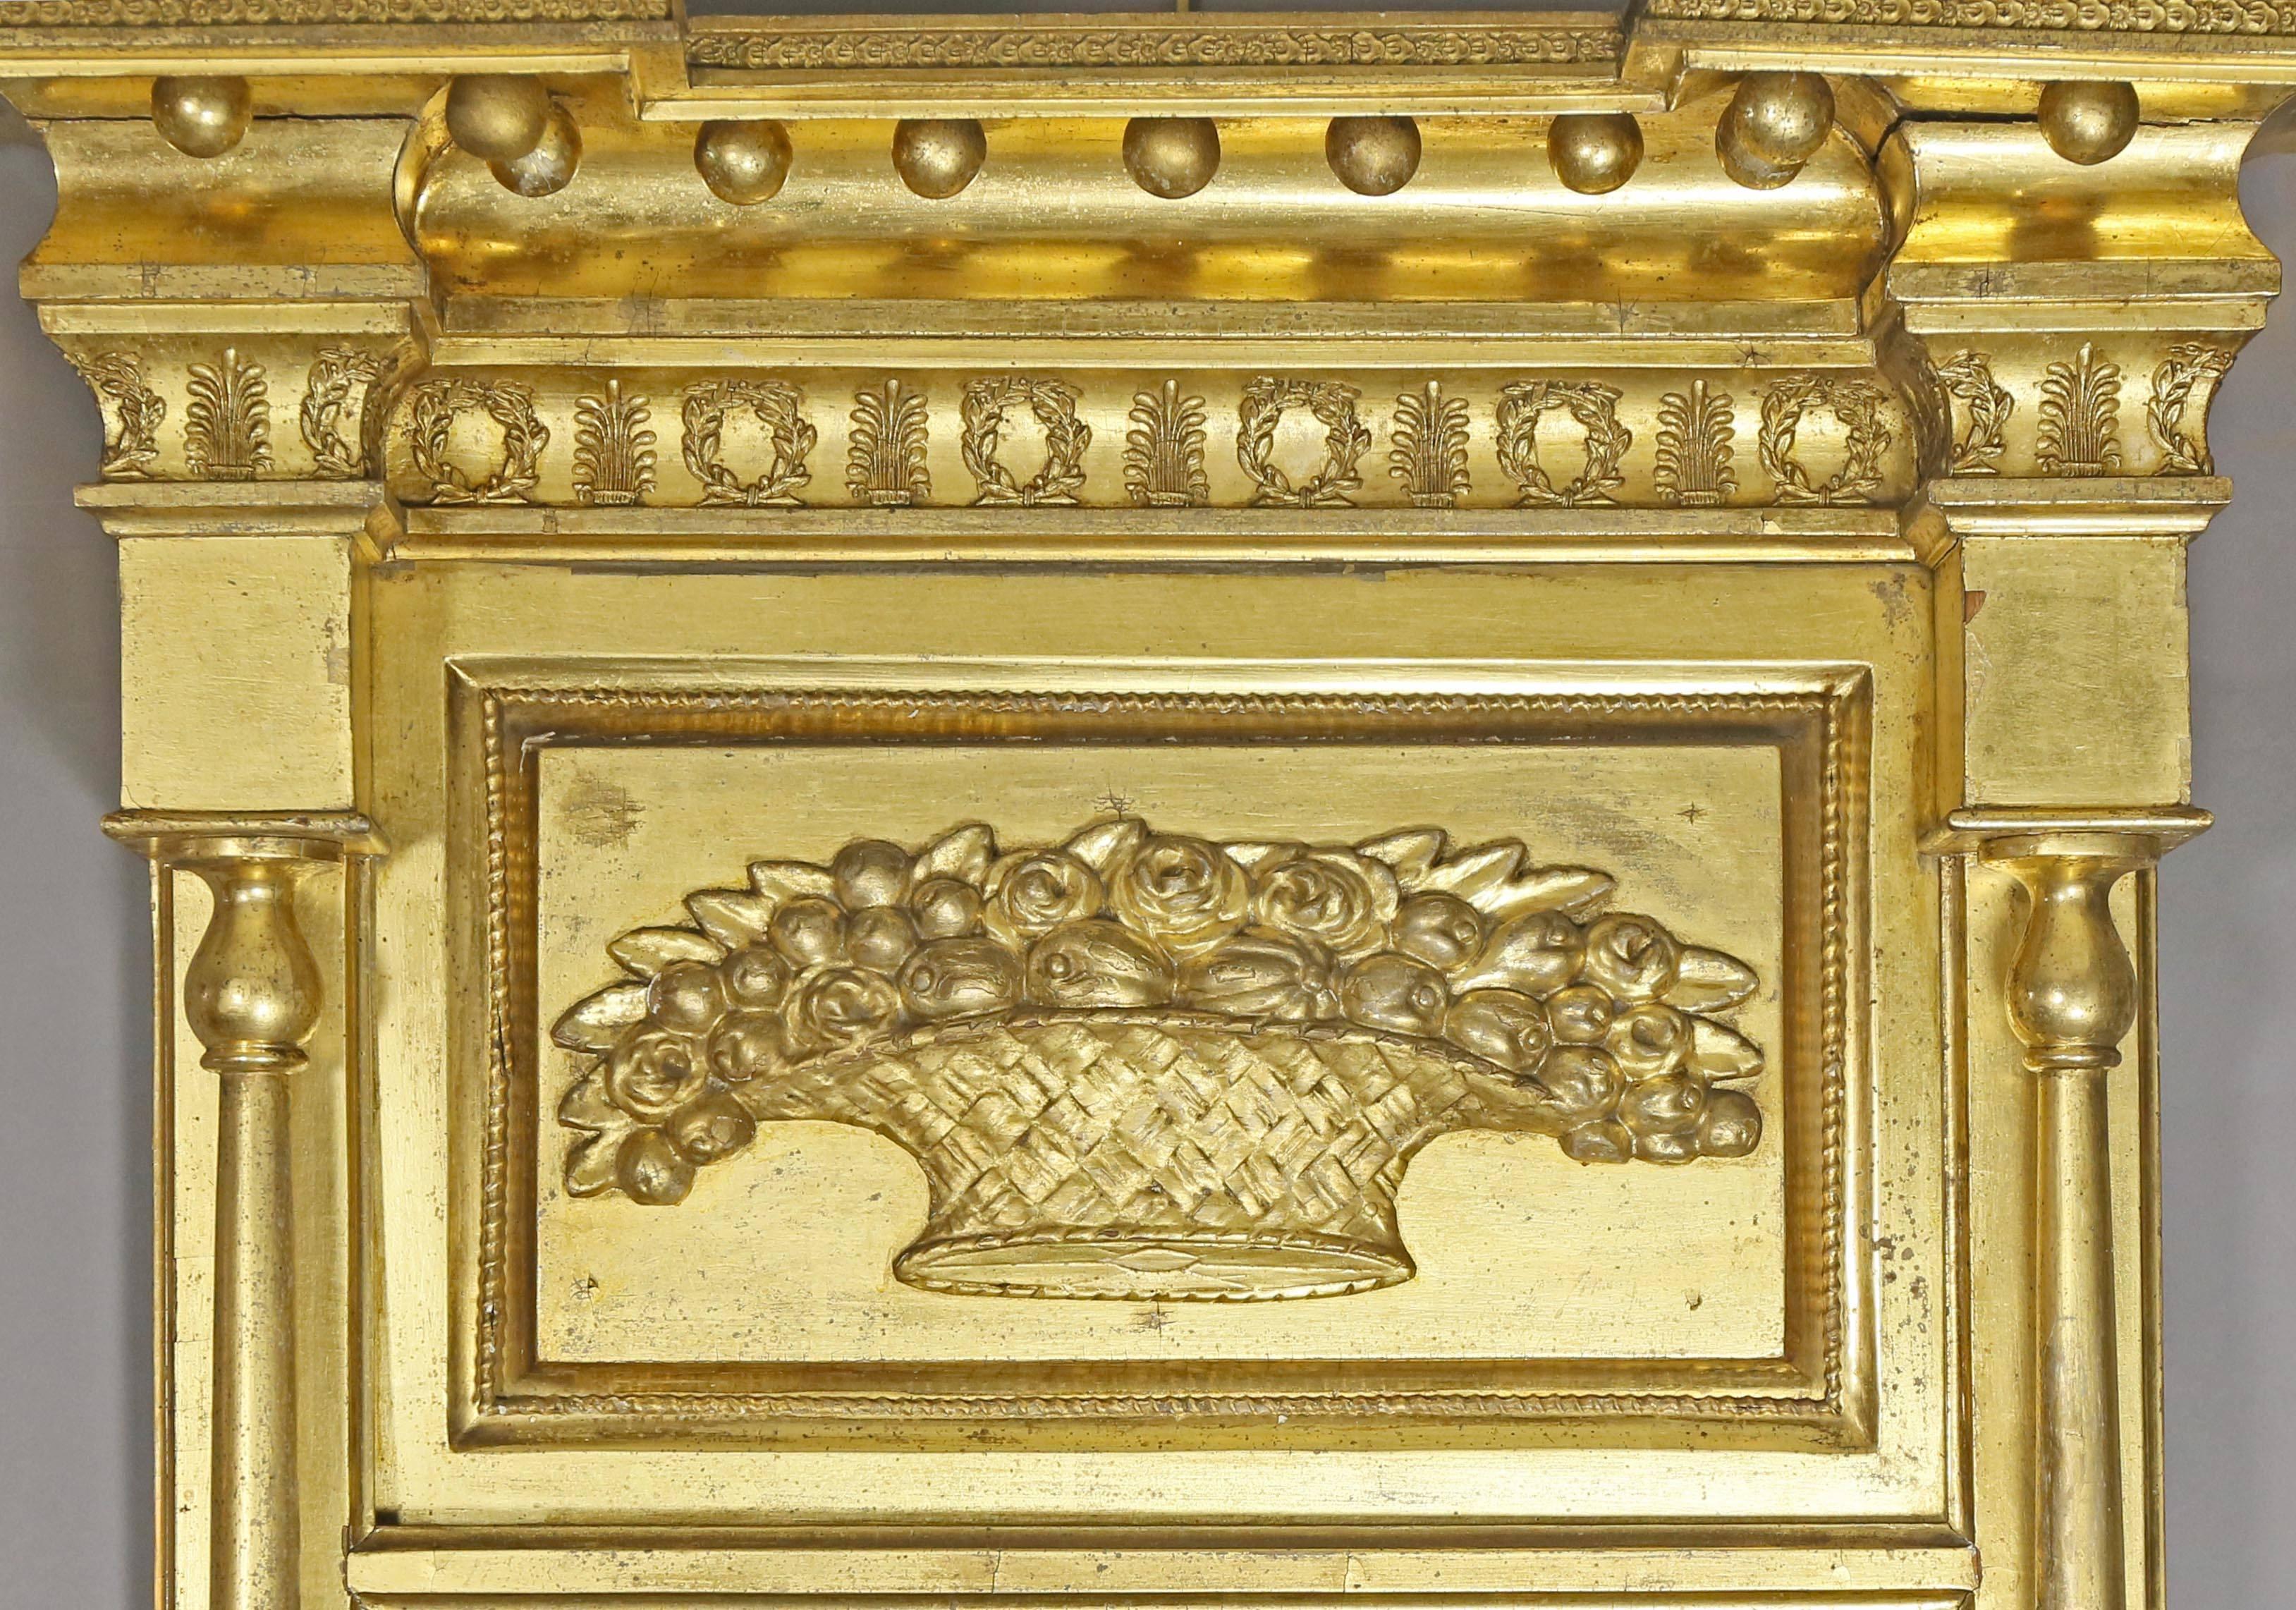 Original gilding with overhanging cornice with sperules over a Samuel McIntire basket of fruit and mirror plate flanked by columns.